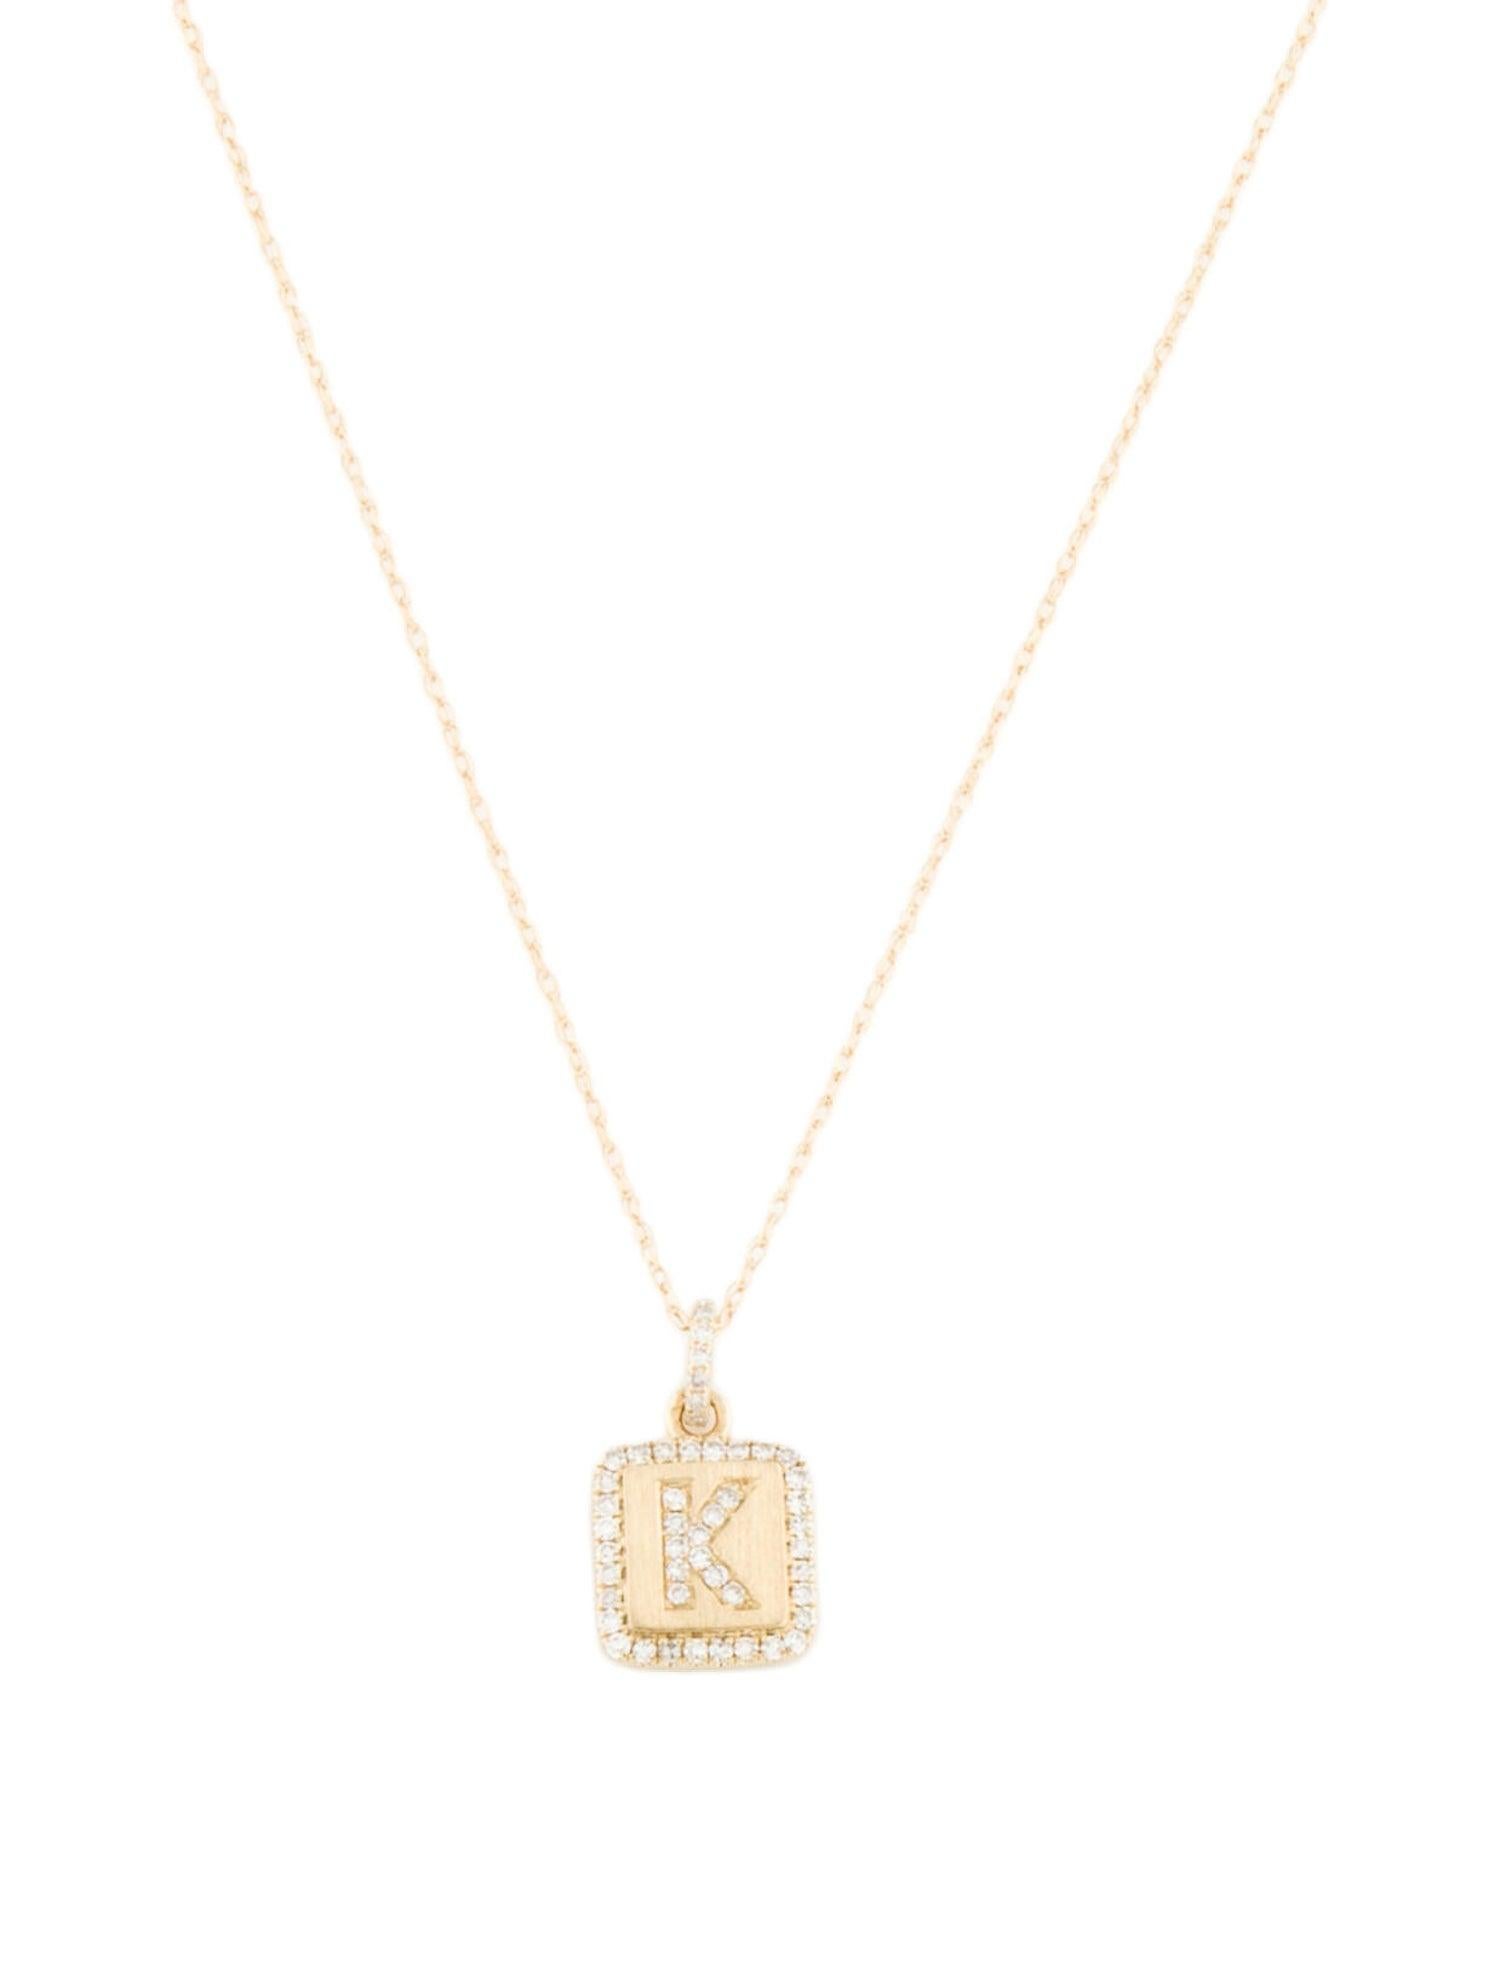 Baguette Cut 14K Yellow Gold Diamond Plate Initals T Necklace for Her For Sale